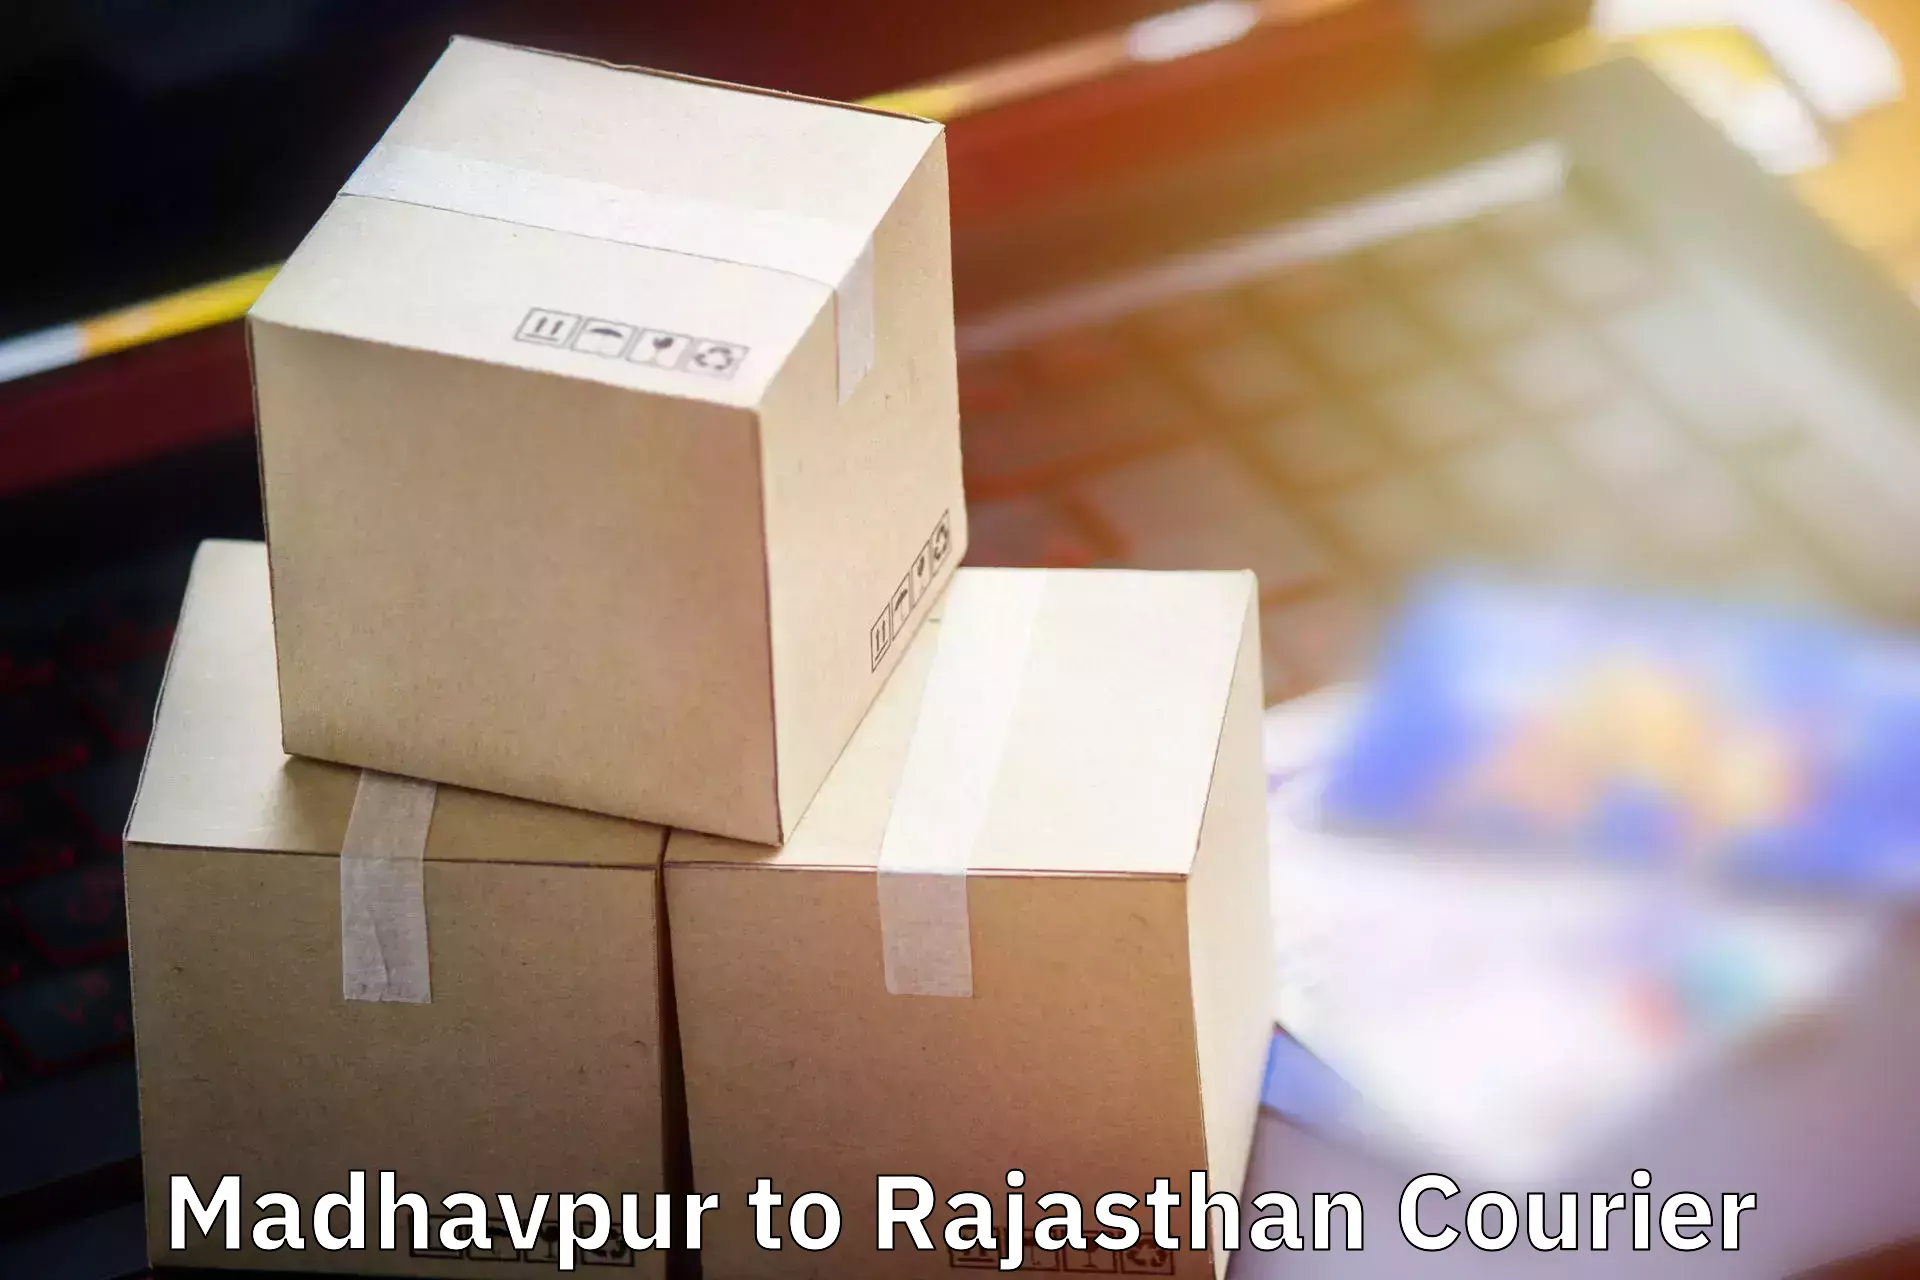 Luggage shipping specialists Madhavpur to Banswara